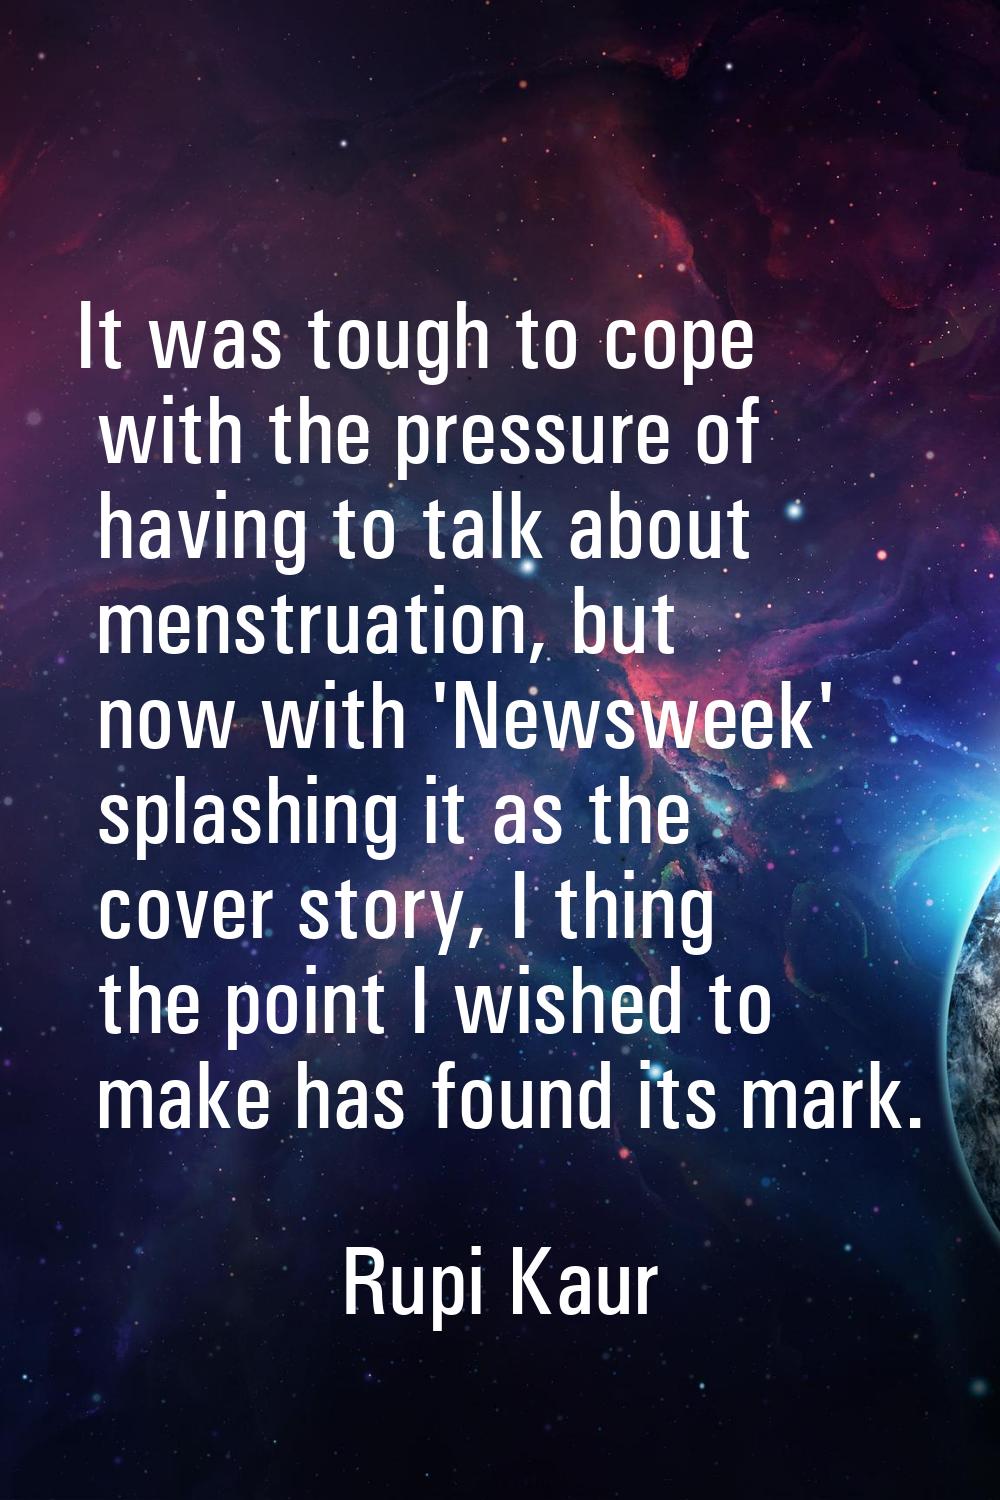 It was tough to cope with the pressure of having to talk about menstruation, but now with 'Newsweek